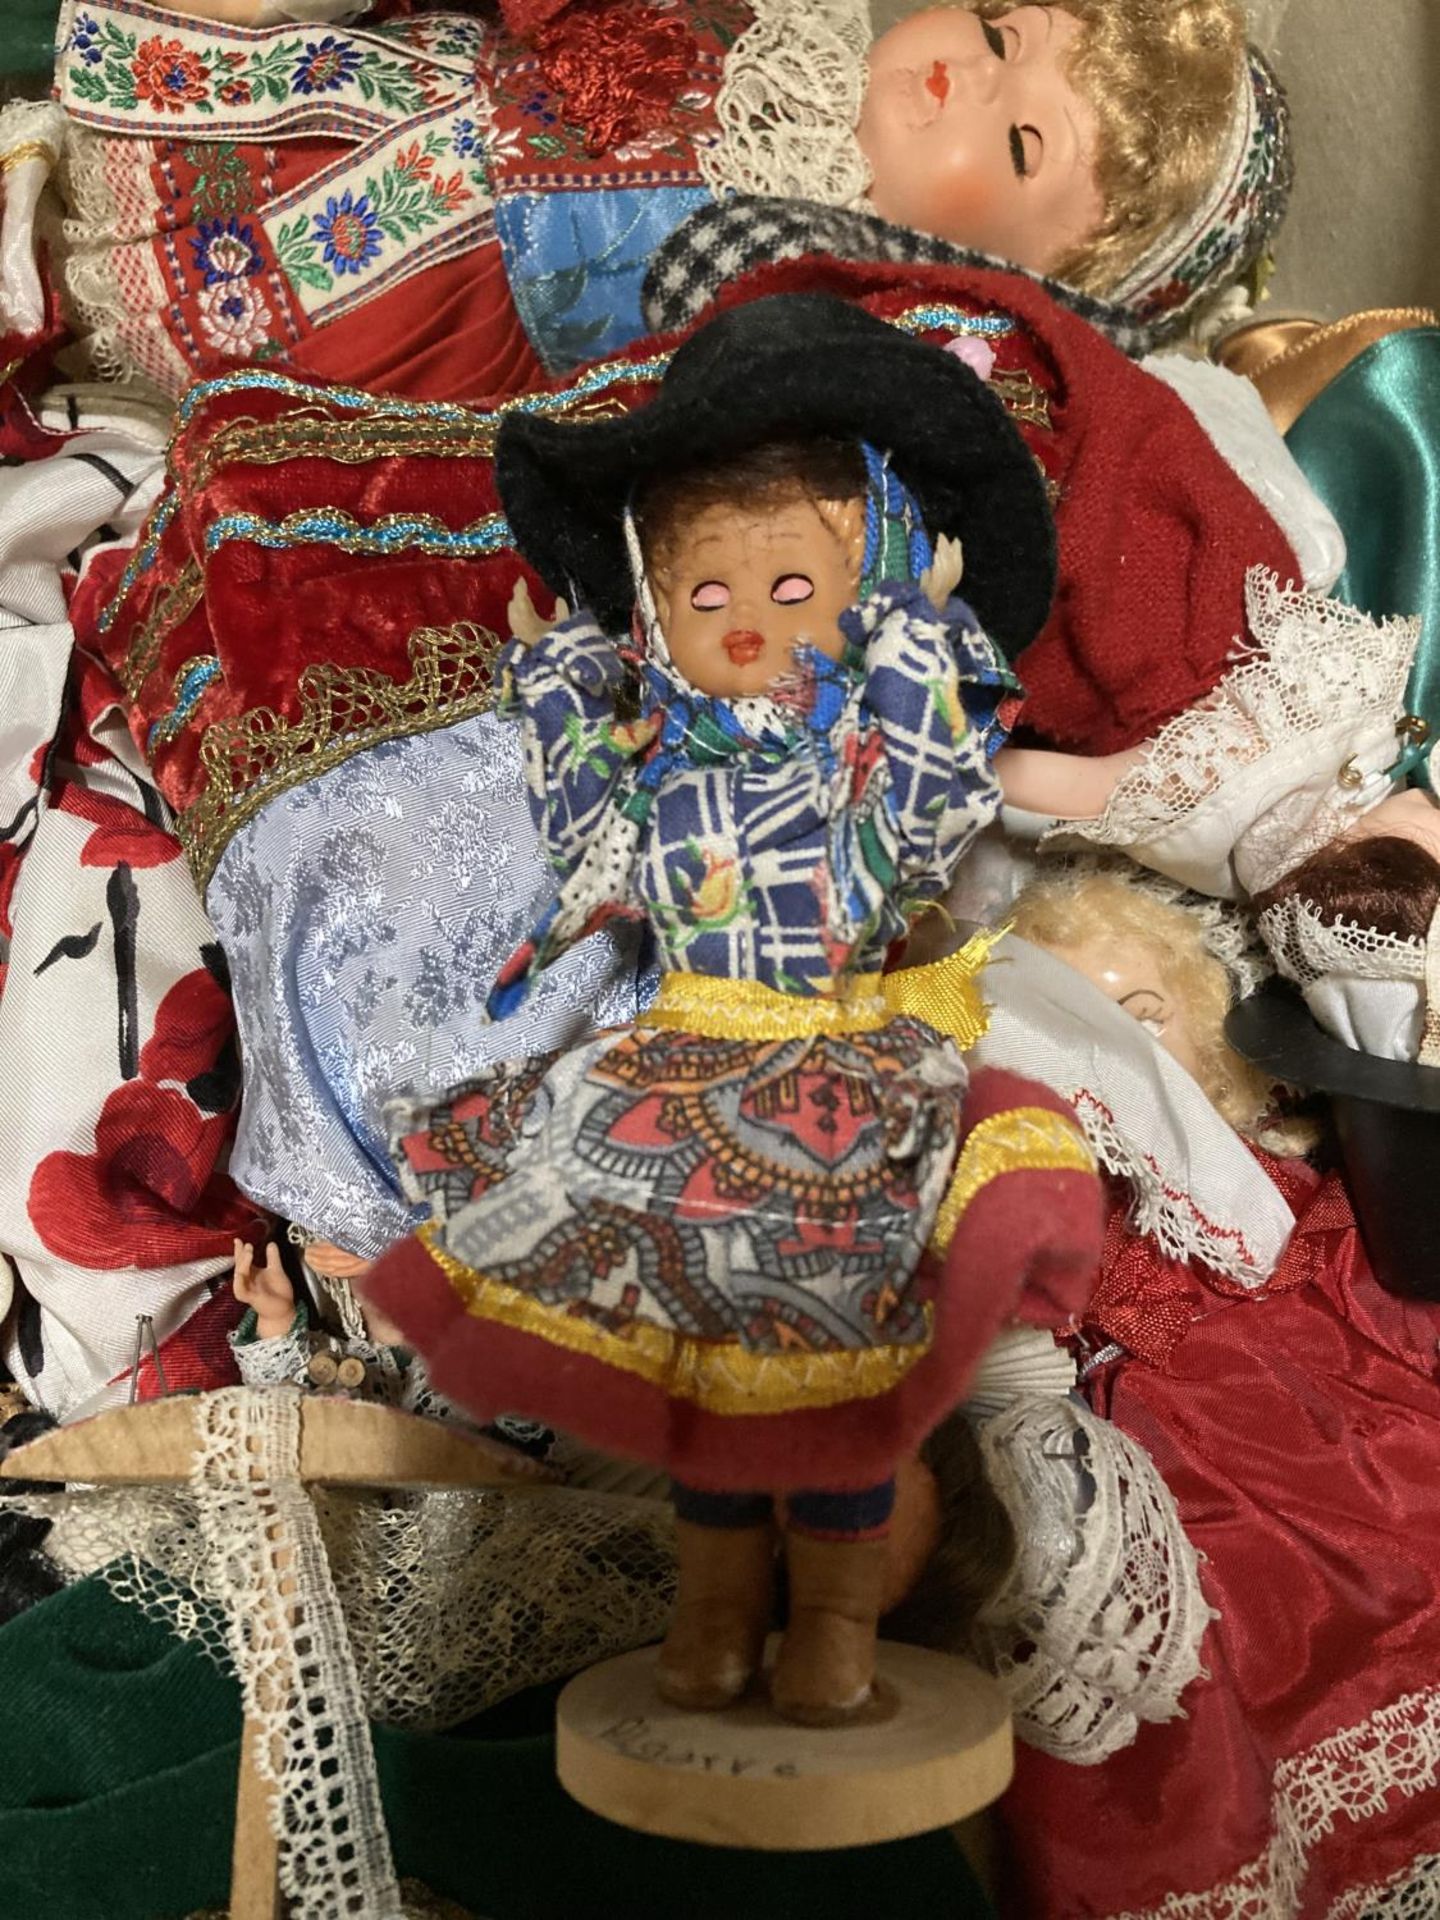 A LARGE COLLECTION OF DOLLS FROM AROUND THE WORLD - Image 5 of 5